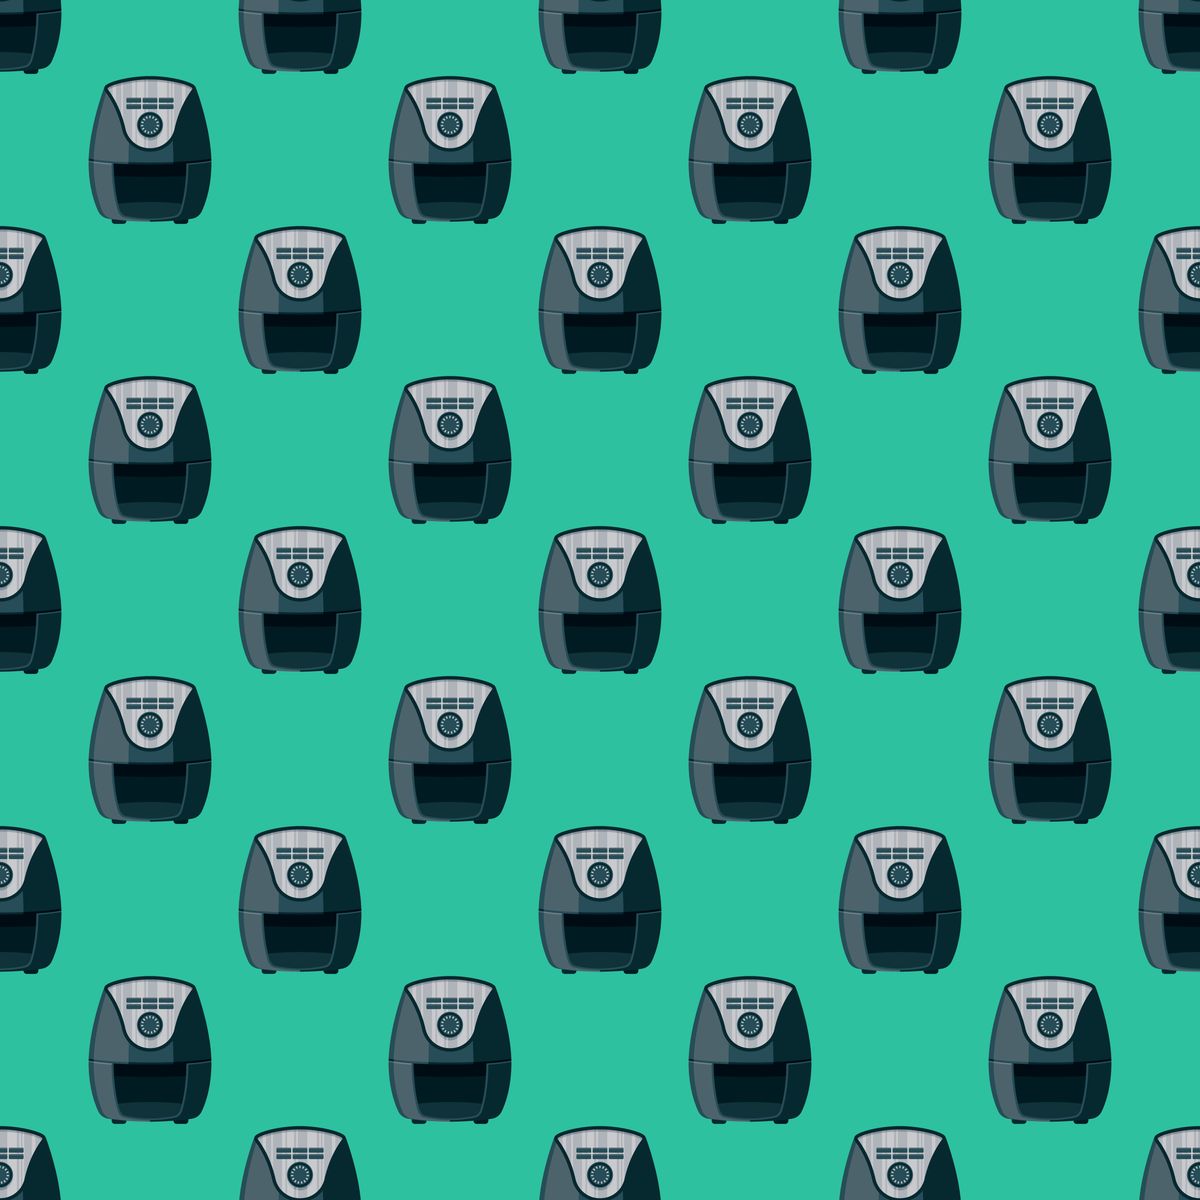 A repeating pattern of air fryer illustrations on a teal background. (bortonia/Getty Images)